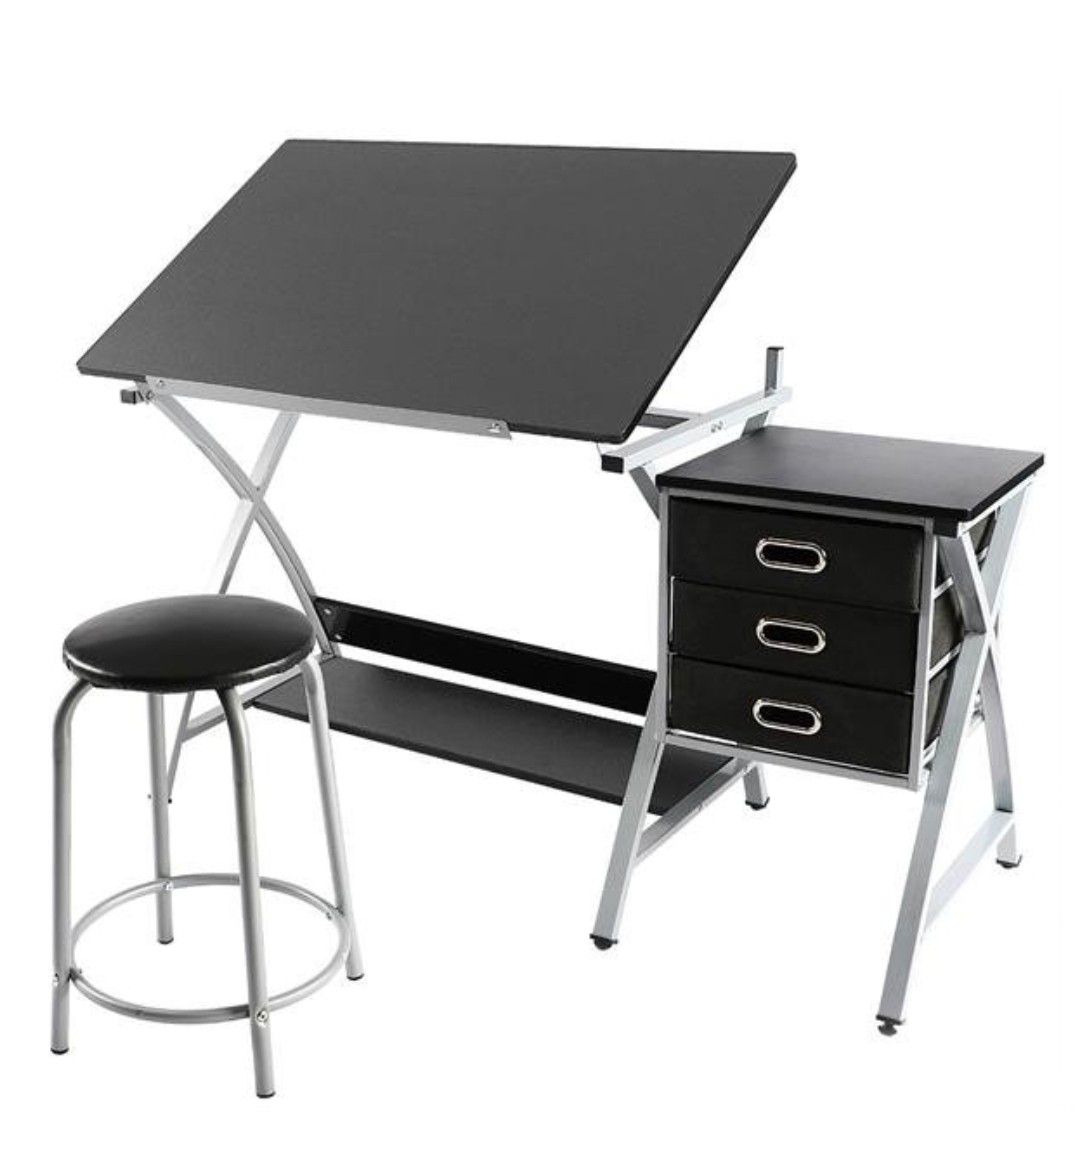 Adjustable Drawing Station Desk Set with Stool Chair Drafting Table